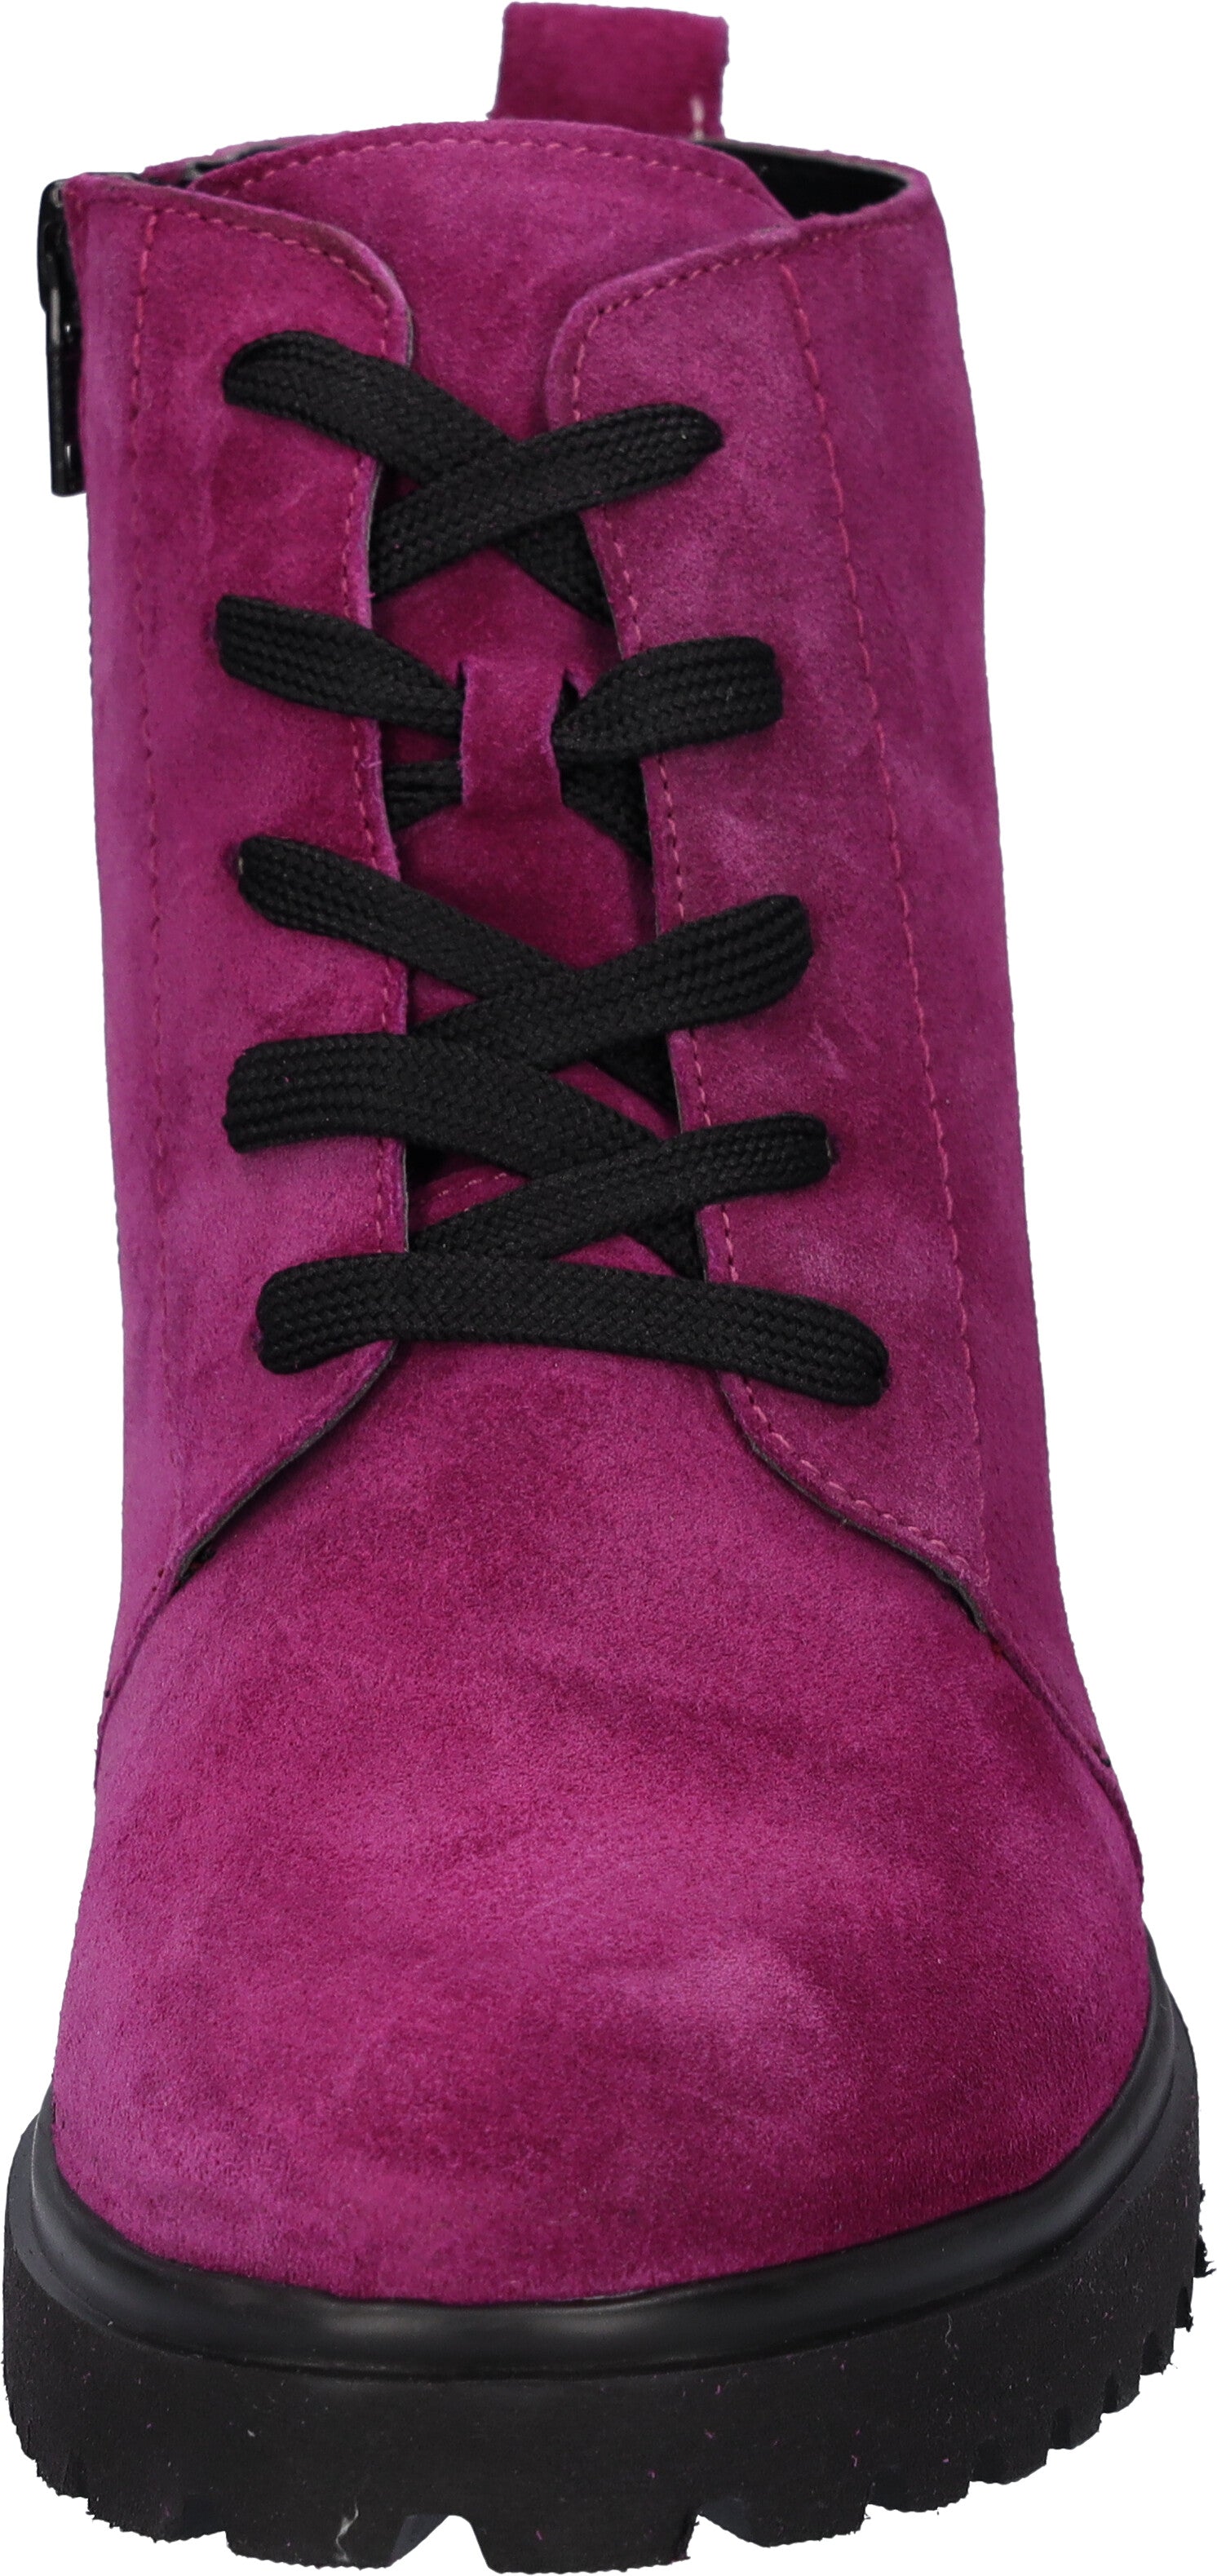 Waldlaufer 716807 195 228 H-Luise Ladies Fuchsia Suede Arch Support Zip & Lace Ankle Boots